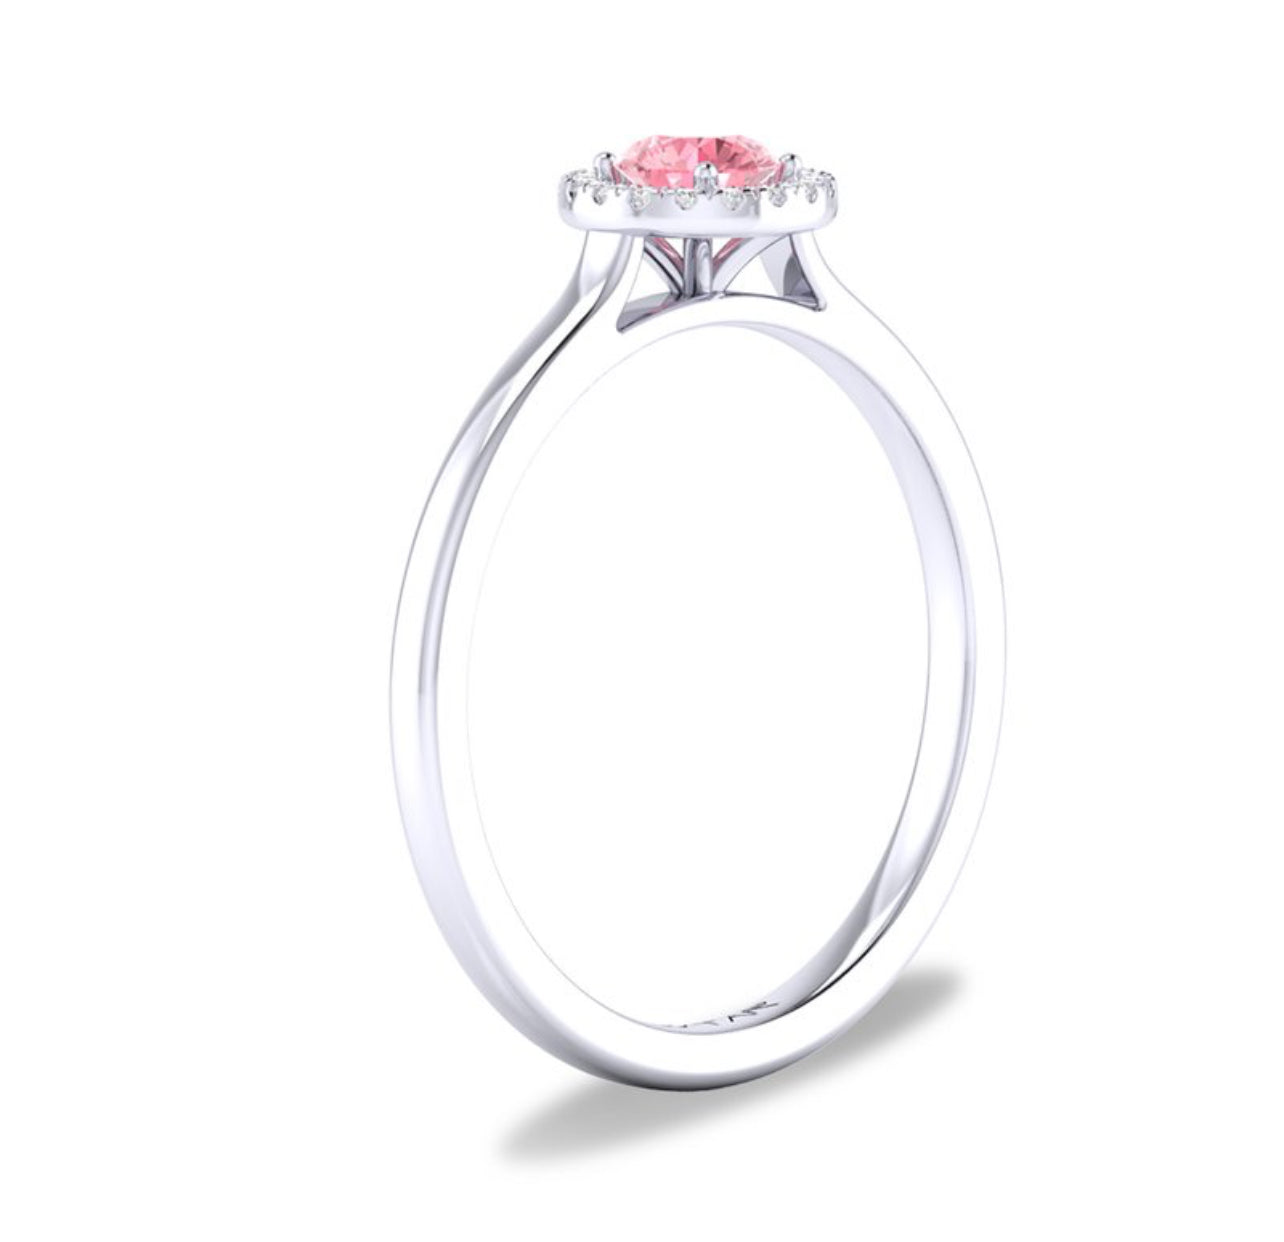 10K or 14K Yellow or White Gold Pink Tourmaline and Diamond Halo Ring